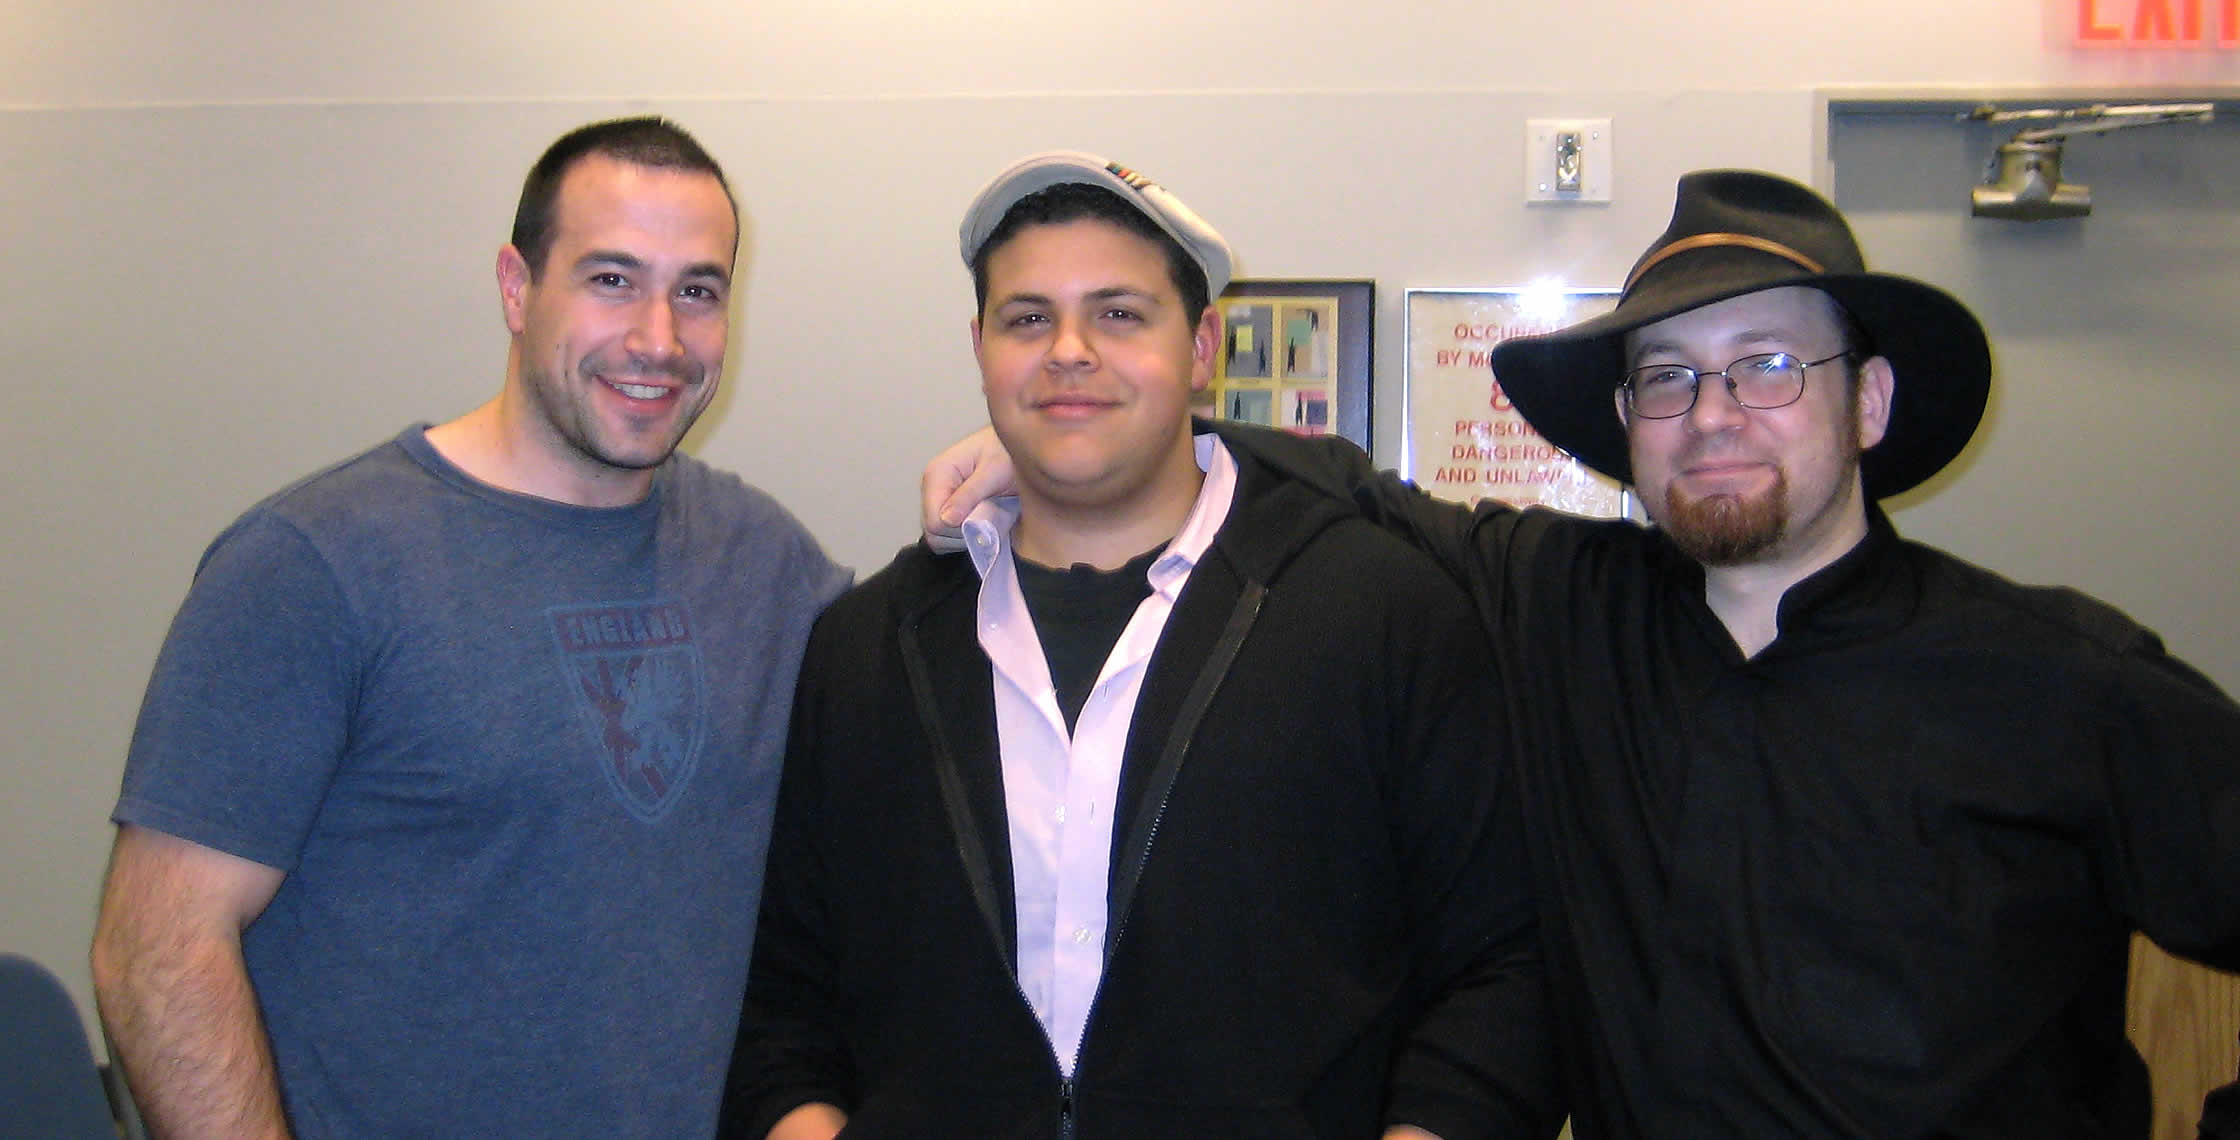 Ben Nadel at the New York ColdFusion User Group (Dec. 2008) with: Clark Valberg and Michael Dinowitz